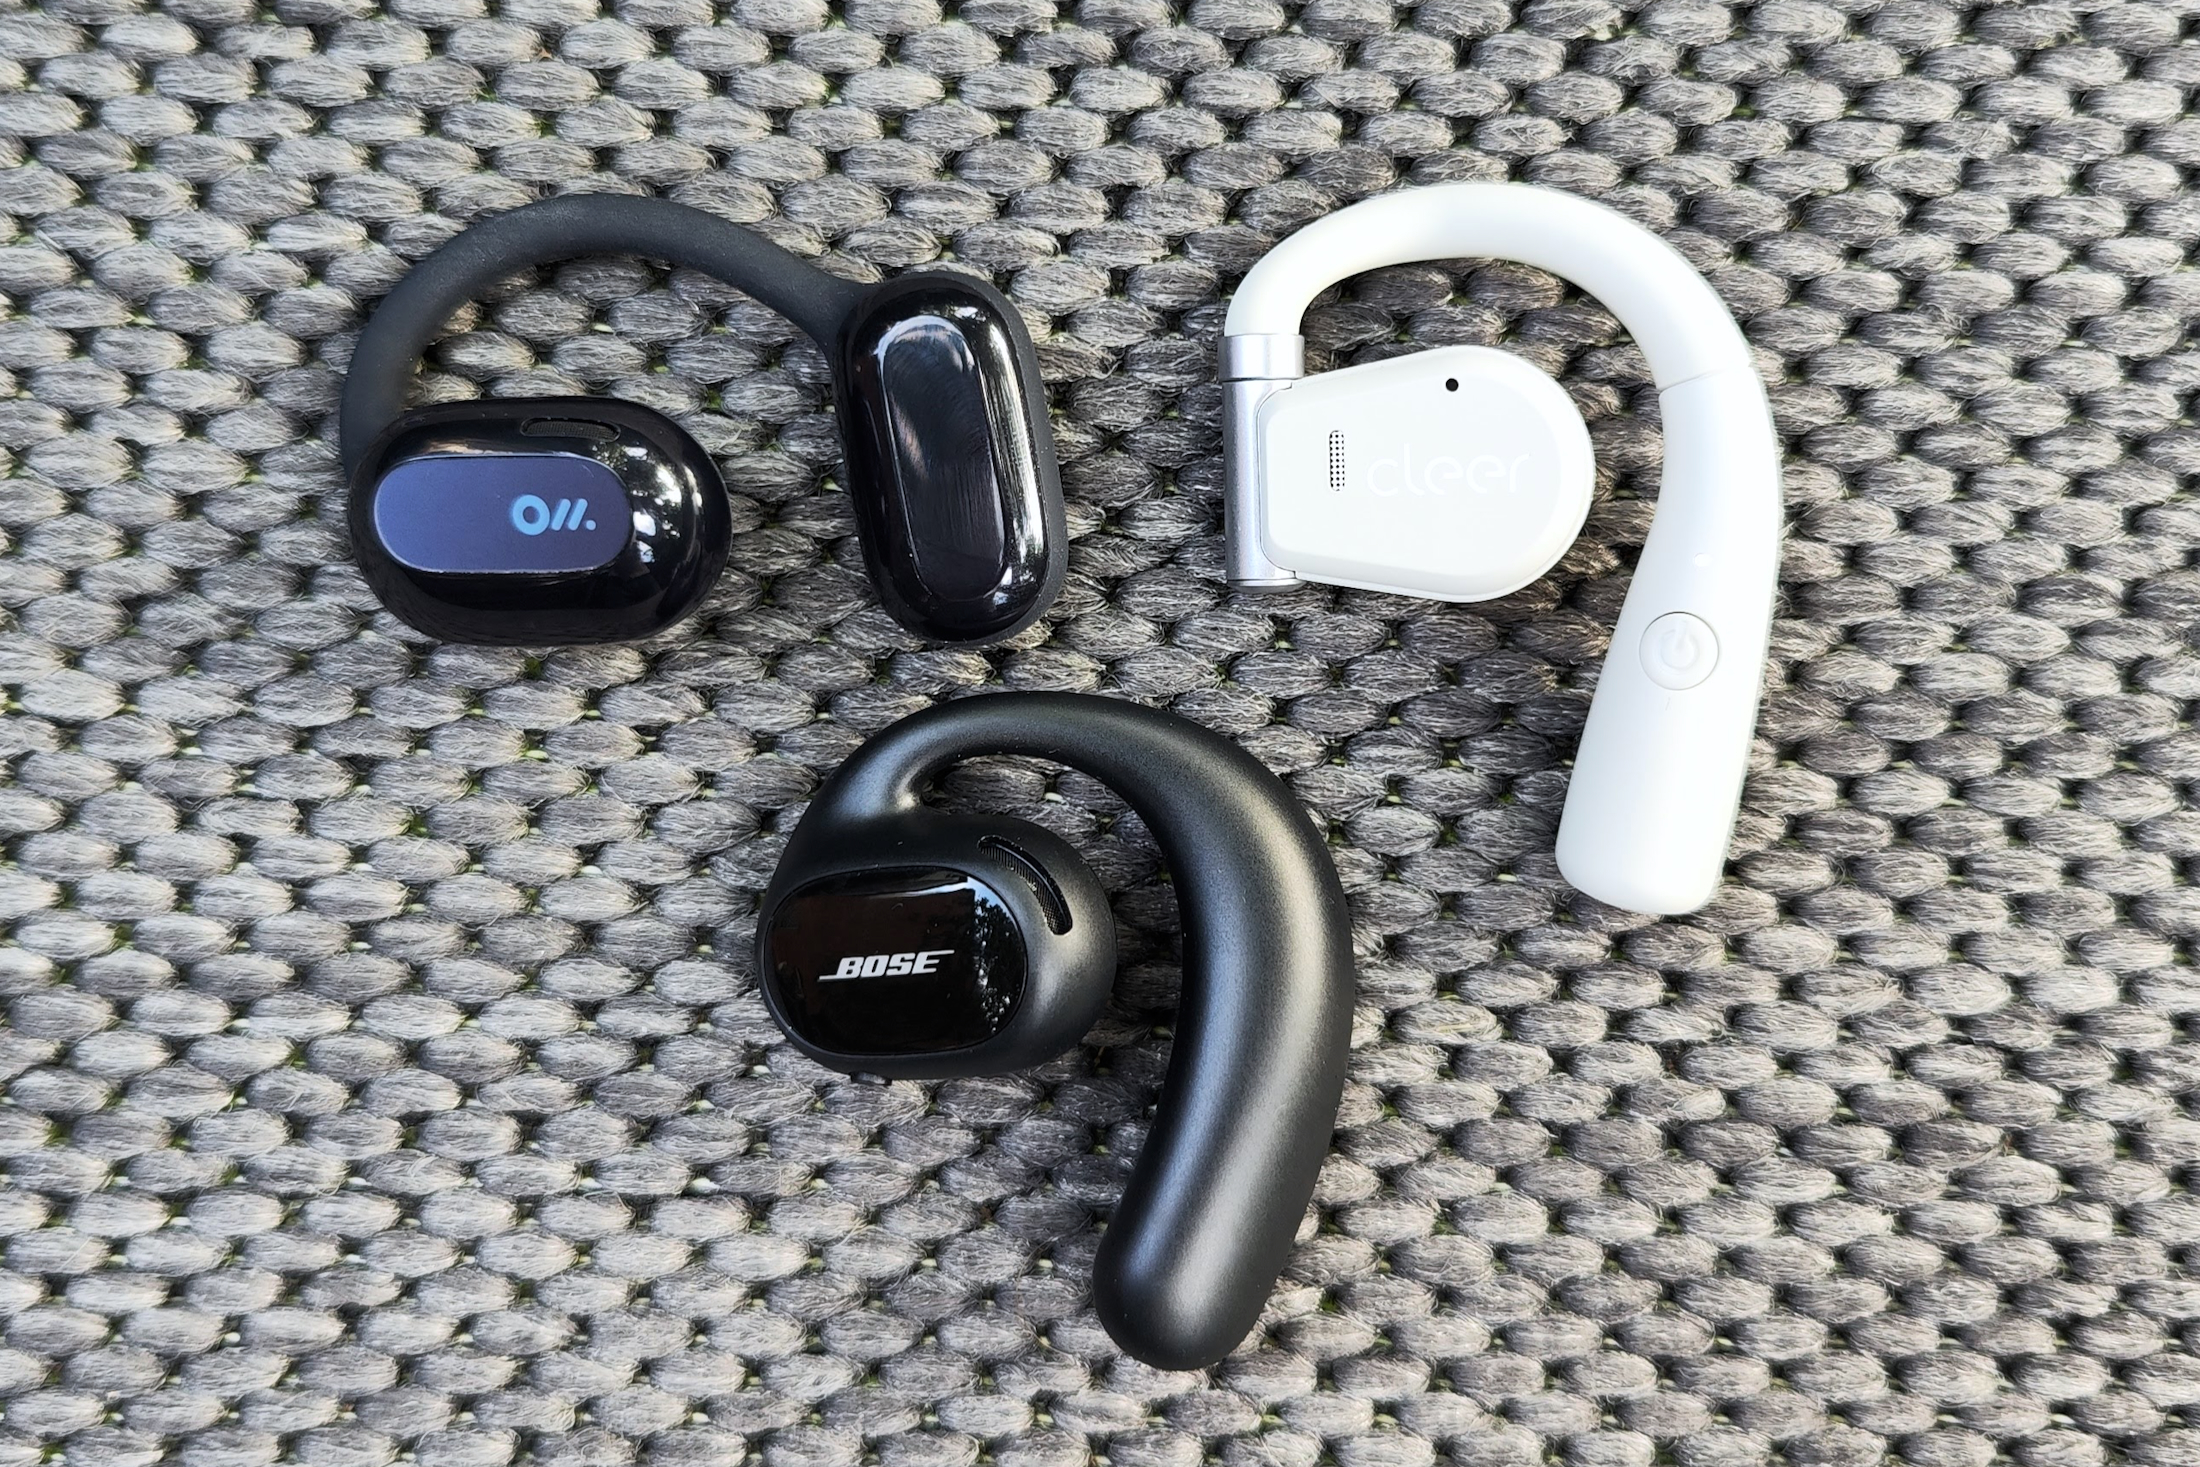  Bose Sport Earbuds - Wireless Earphones - Bluetooth In Ear  Headphones for Workouts and Running, Triple Black : Electronics